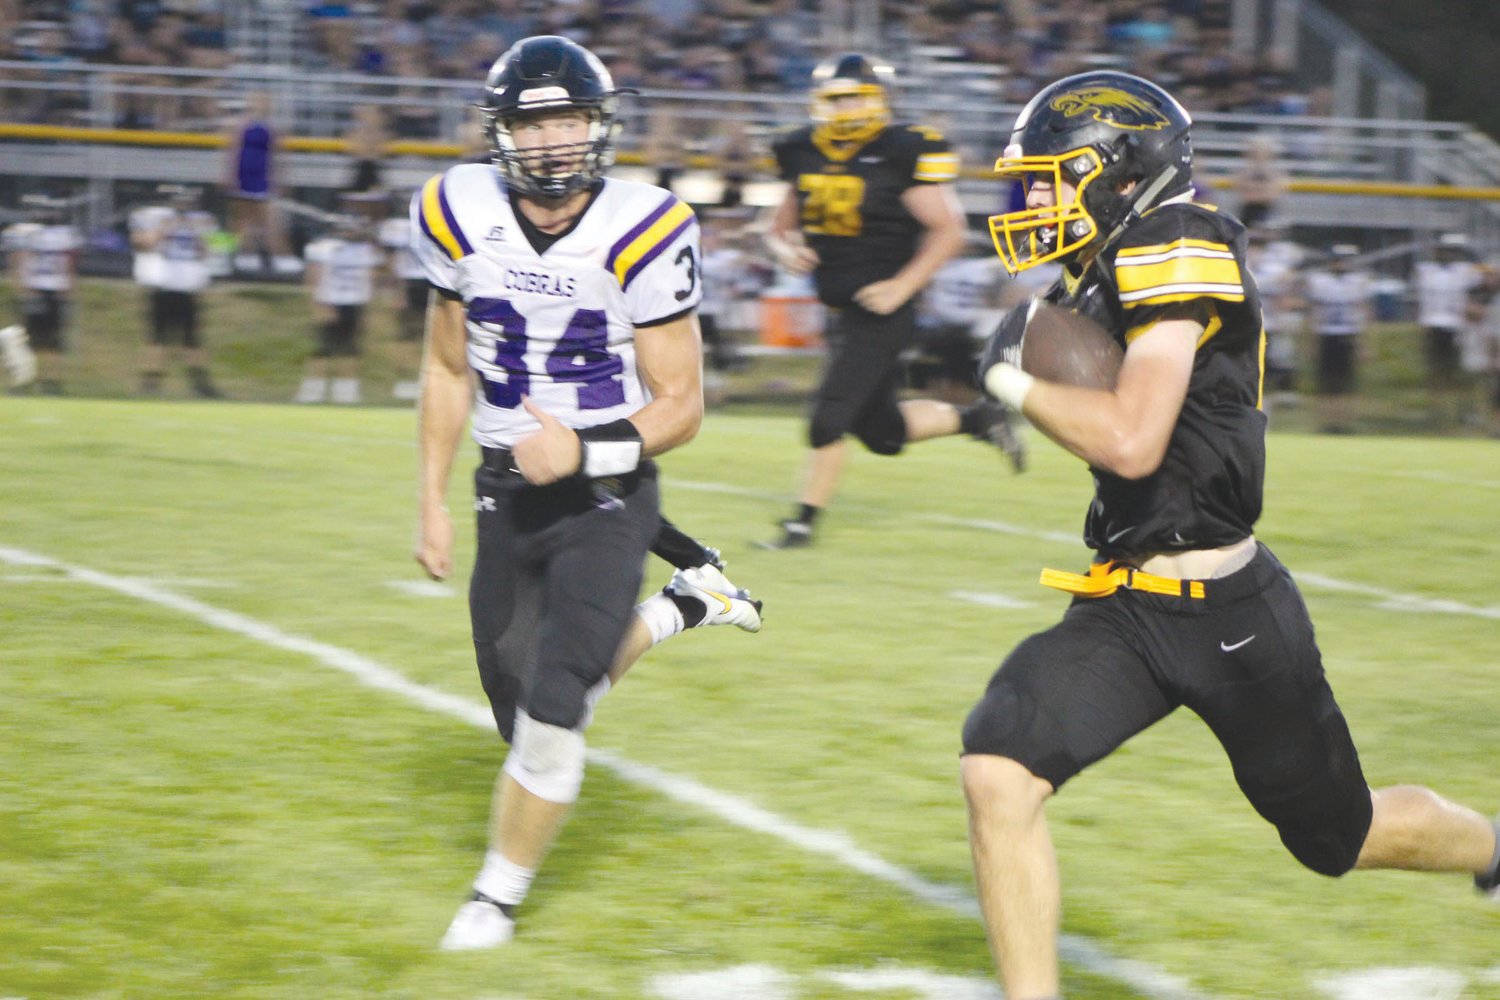 Mid-Prairie running back Kayden Reinier sprints past Sigourney Keota’s Brady Duwa for a long gain late in the first half of Friday night’s season opener in Wellman. Reinier rushed for 134 yards and two TDs.